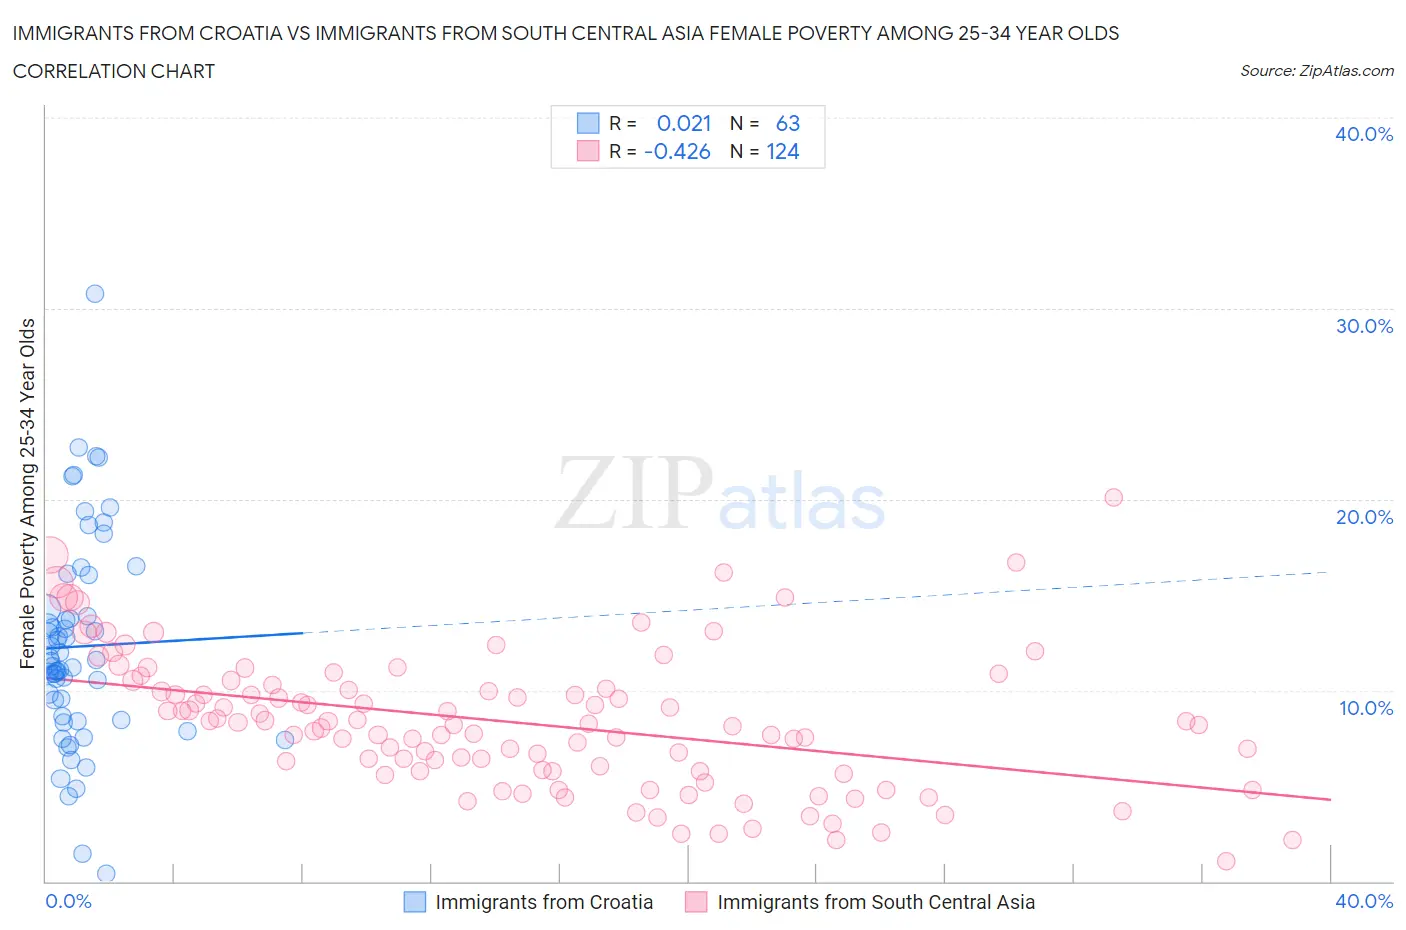 Immigrants from Croatia vs Immigrants from South Central Asia Female Poverty Among 25-34 Year Olds